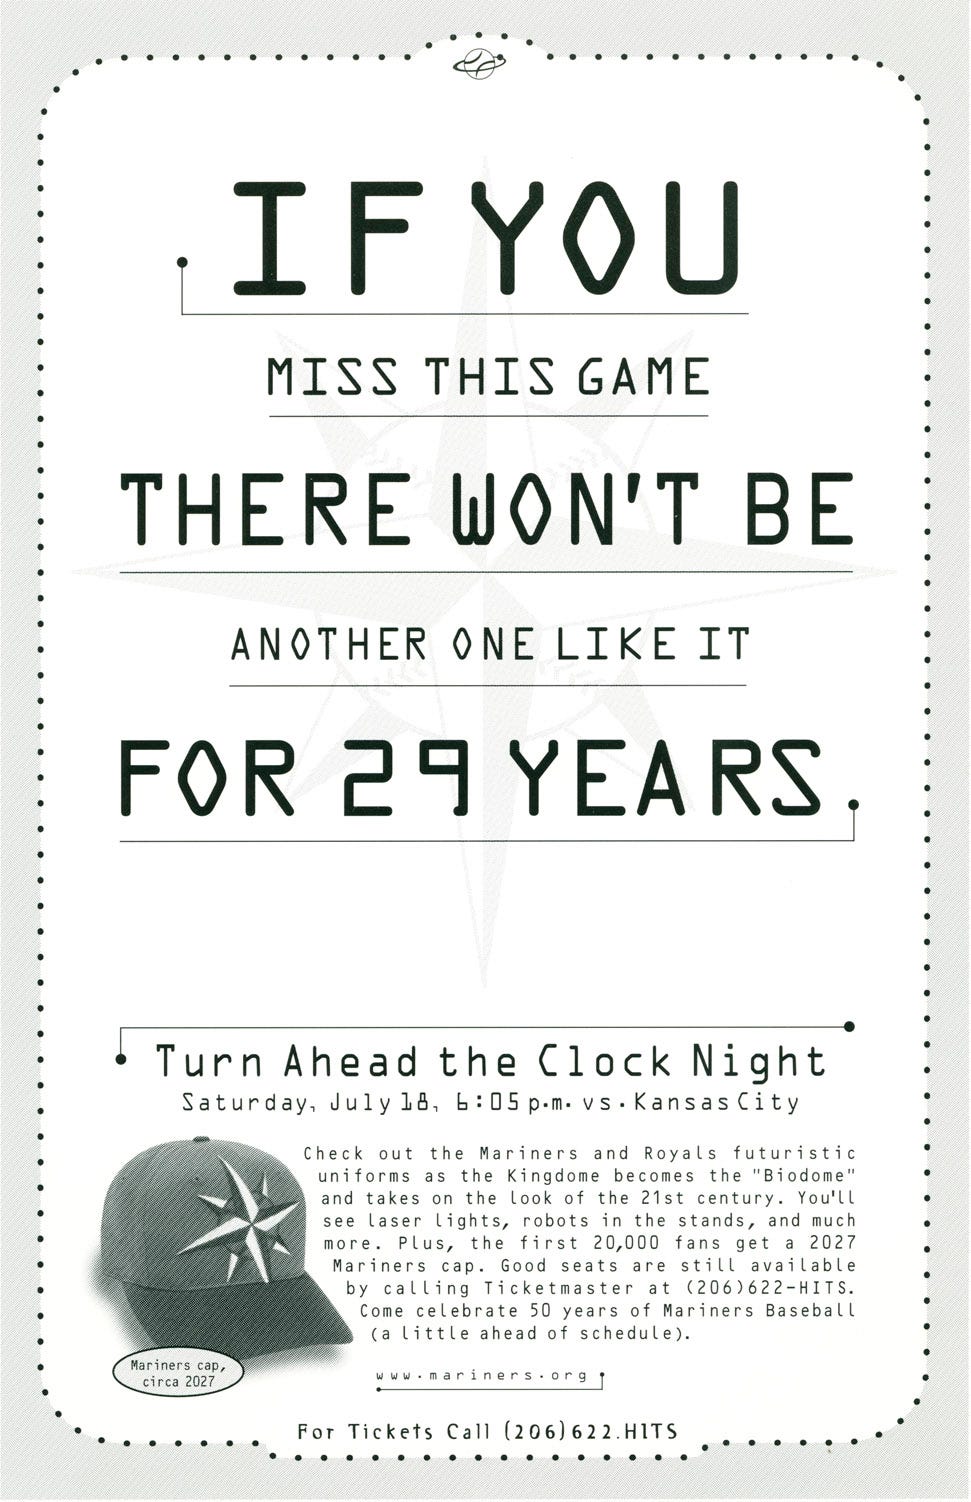 Turn Ahead The Clock Night returns for its 20th anniversary tonight. Relive  the legendary game that started it all